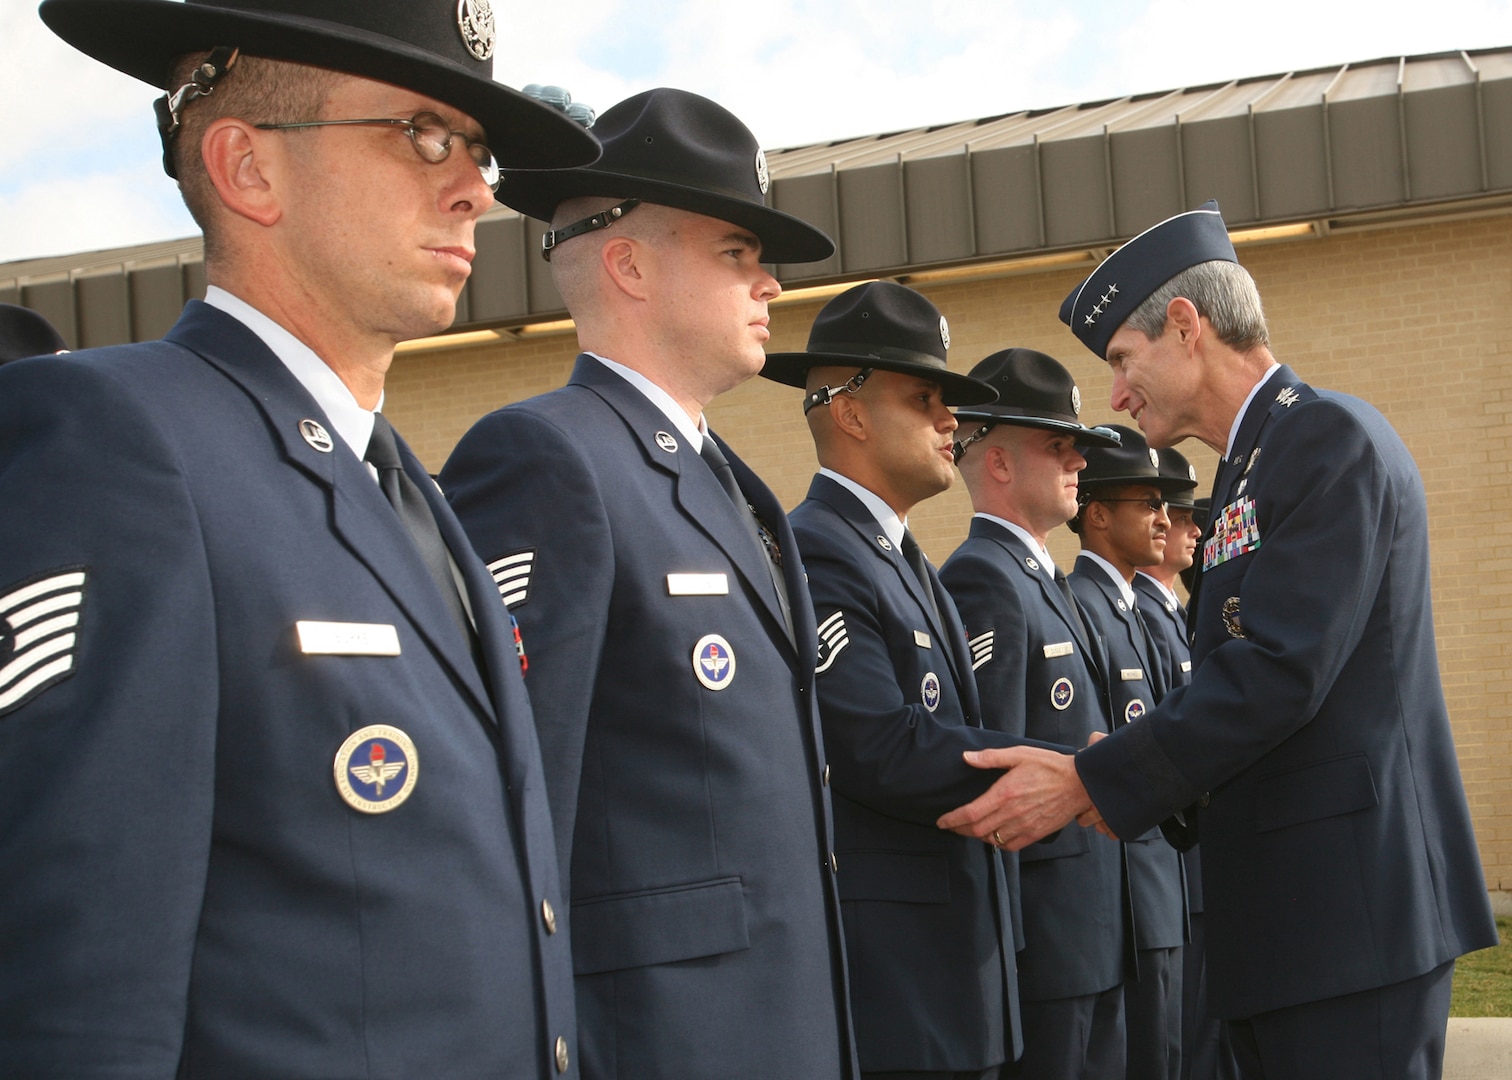 Air Force Chief of Staff Gen. Norton Schwartz shakes hands with Staff Sgt. Hector Paiz, 331st Training Squadron, after the BMT graduation Oct. 31 on Lackland Air Force Base, Texas. While on base, General Schwartz administered the Oath of Enlistment to basic training graduates and served as the reviewing official for the BMT parade. (U.S. Air Force photo/Robbin Cresswell)  